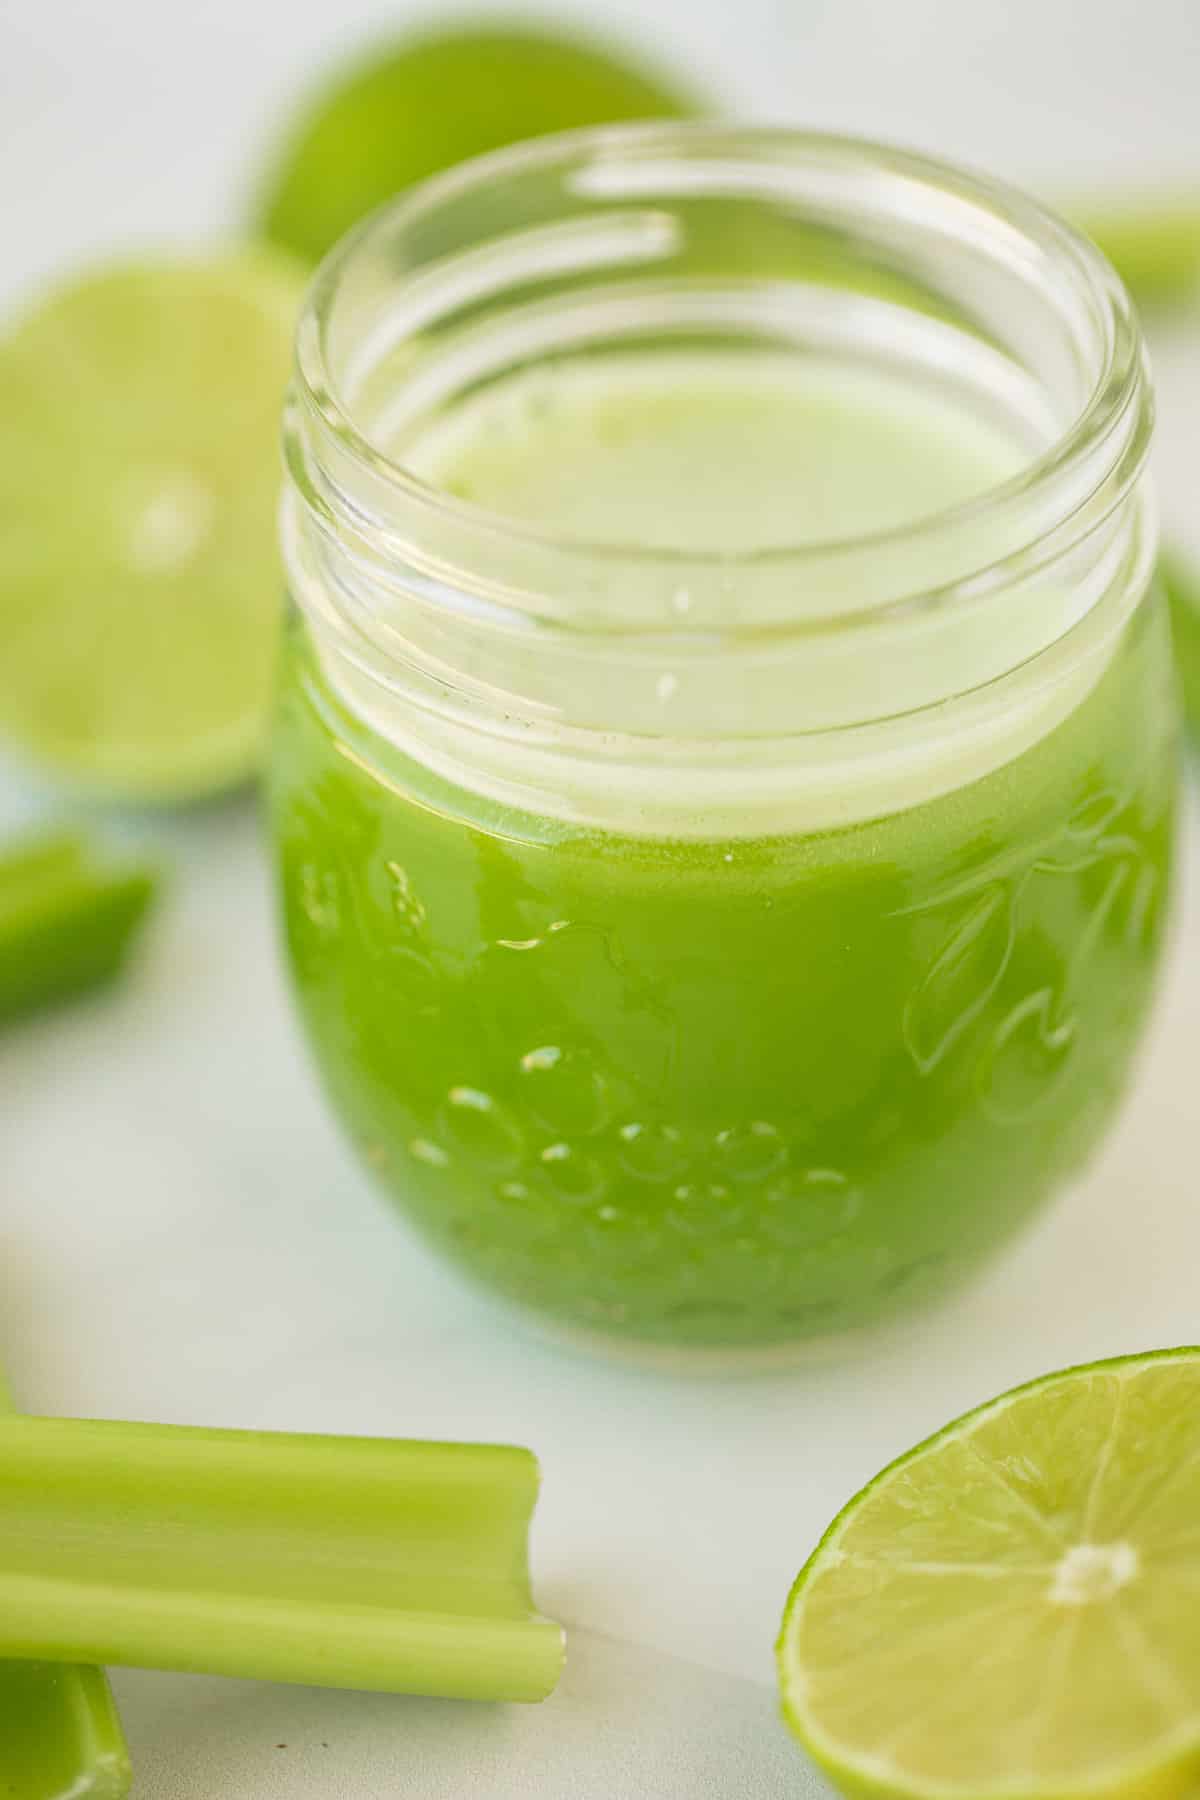 glass of celery juice on a table with celery and limes.